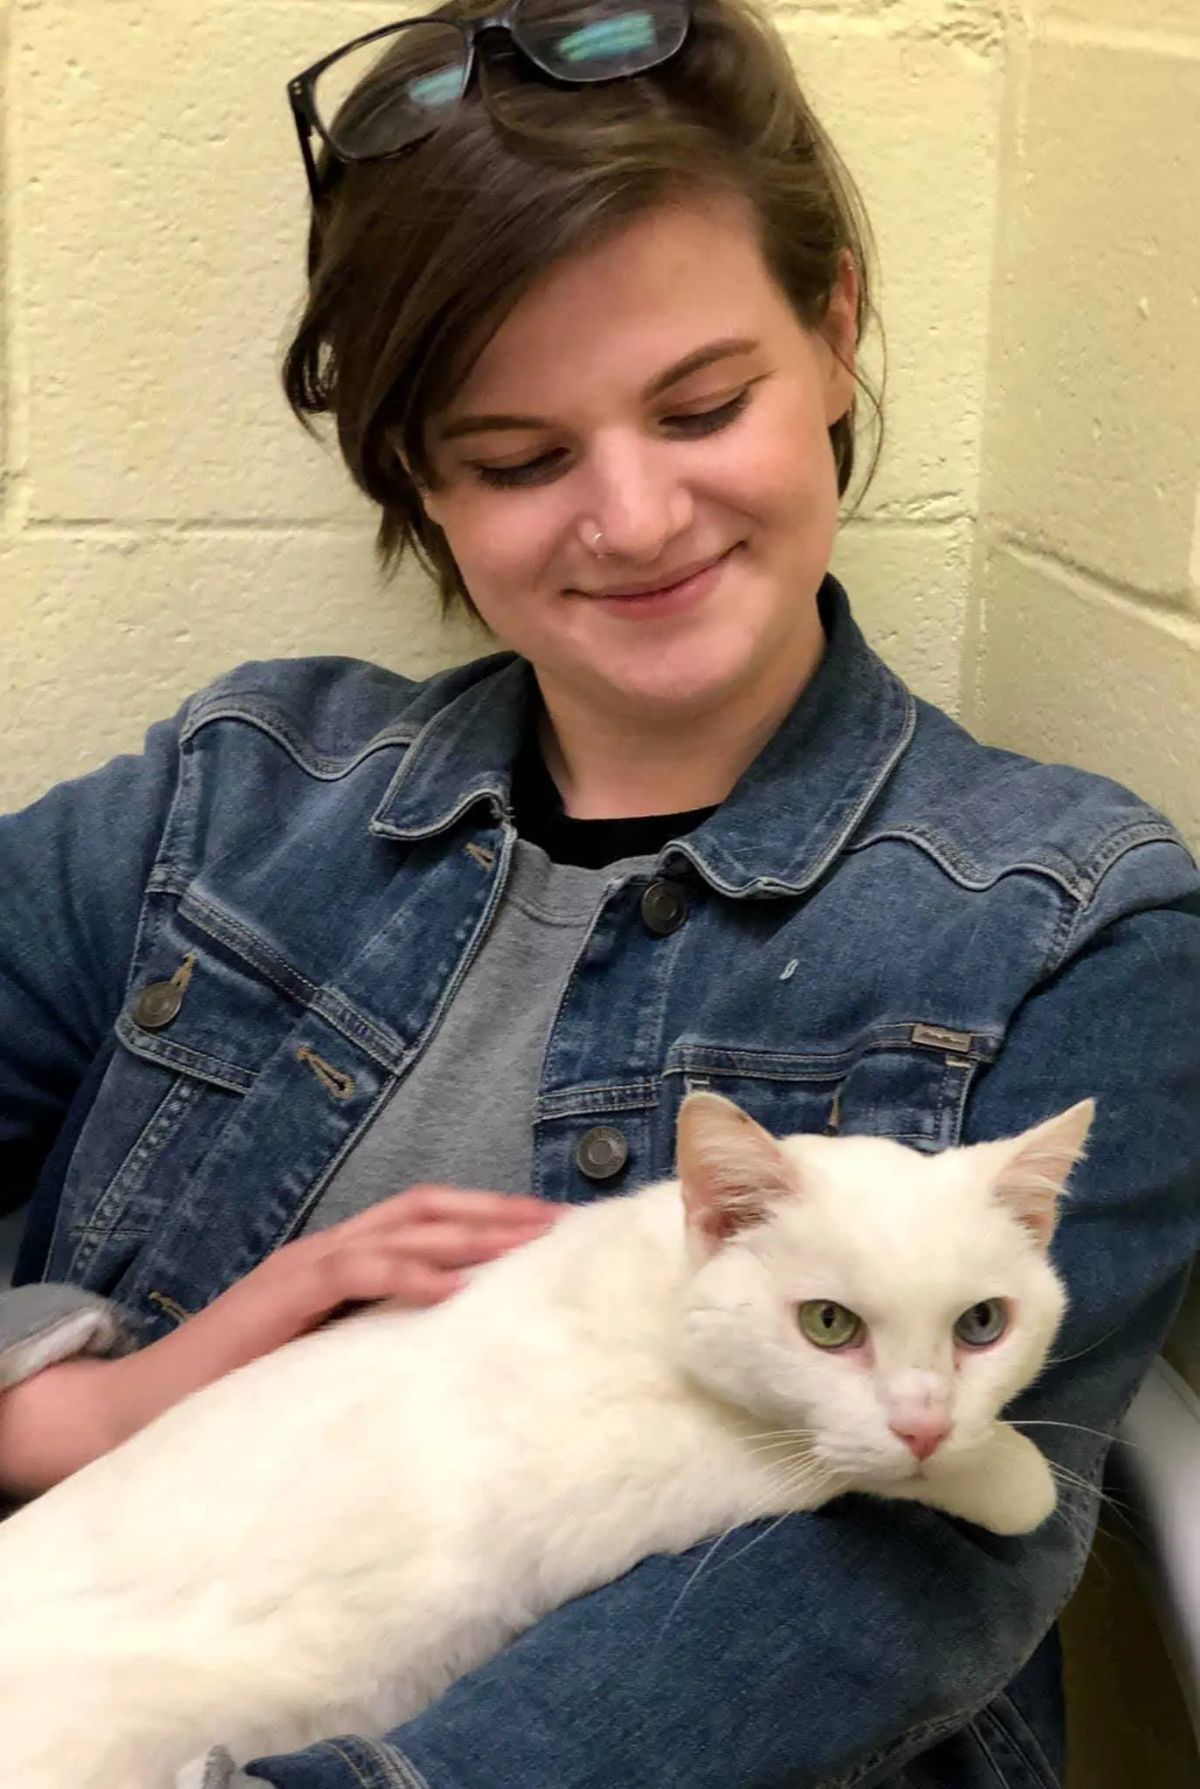 young woman sitting on the floor against a yellow wall holding and petting a white cat